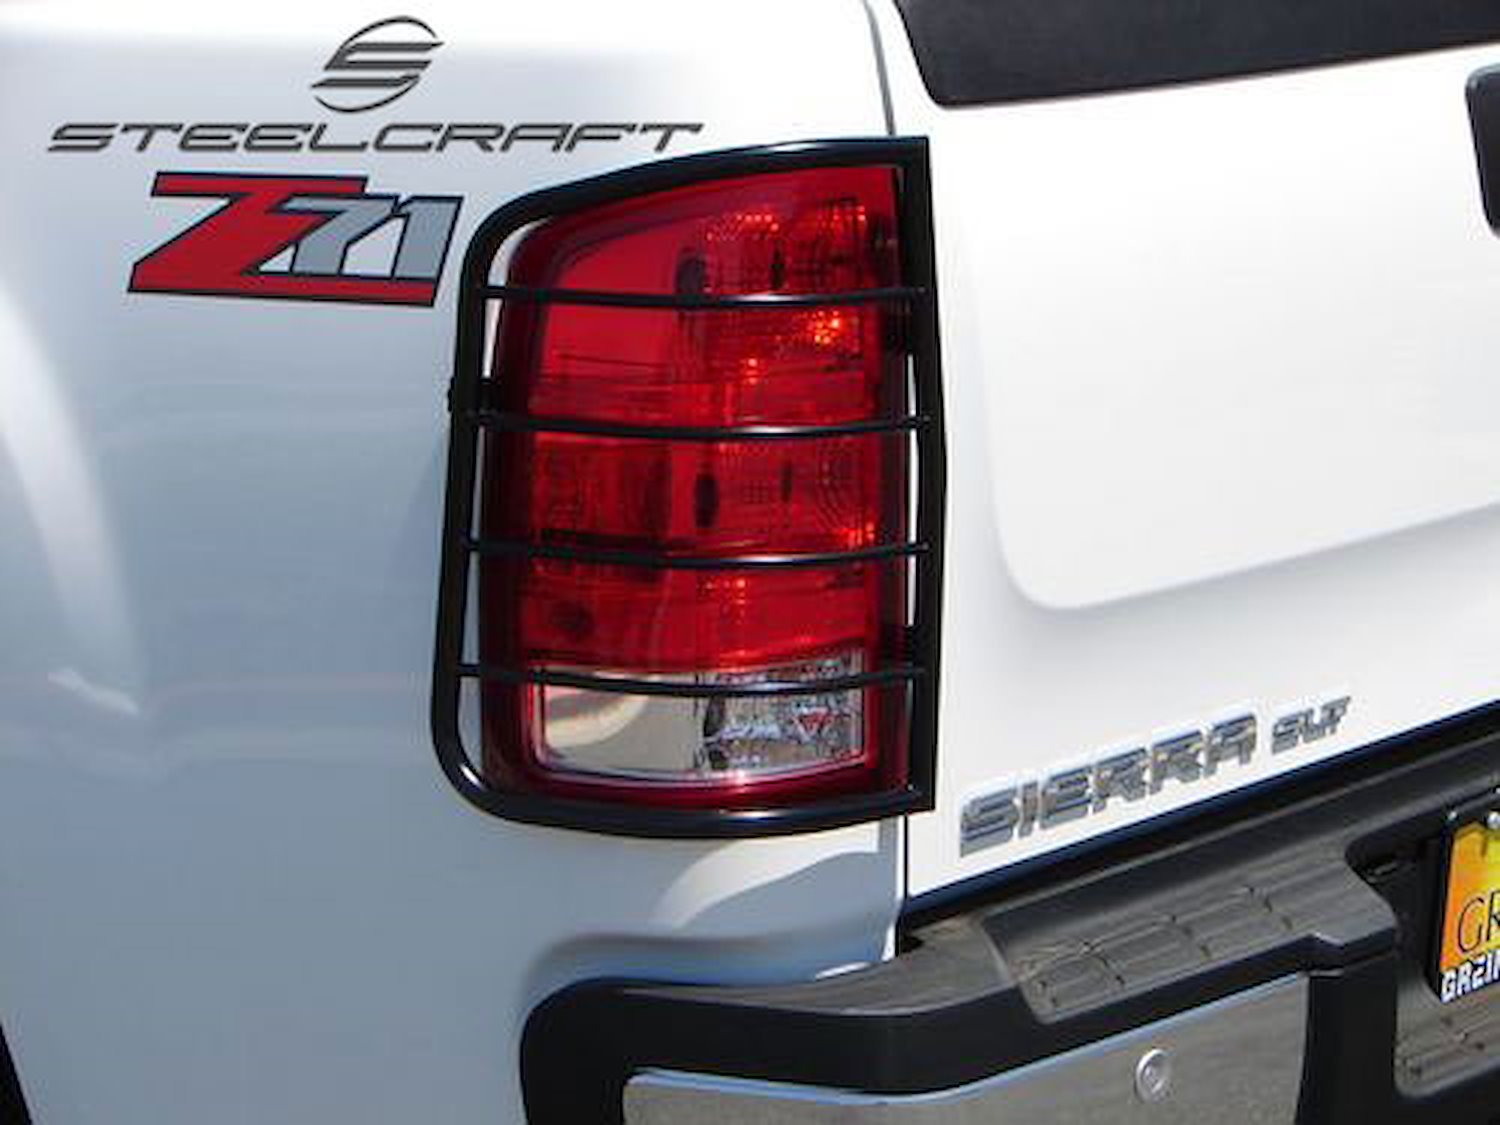 Taillight Guards are designed to contour your SUV or truck appearance and protection. Features simpl